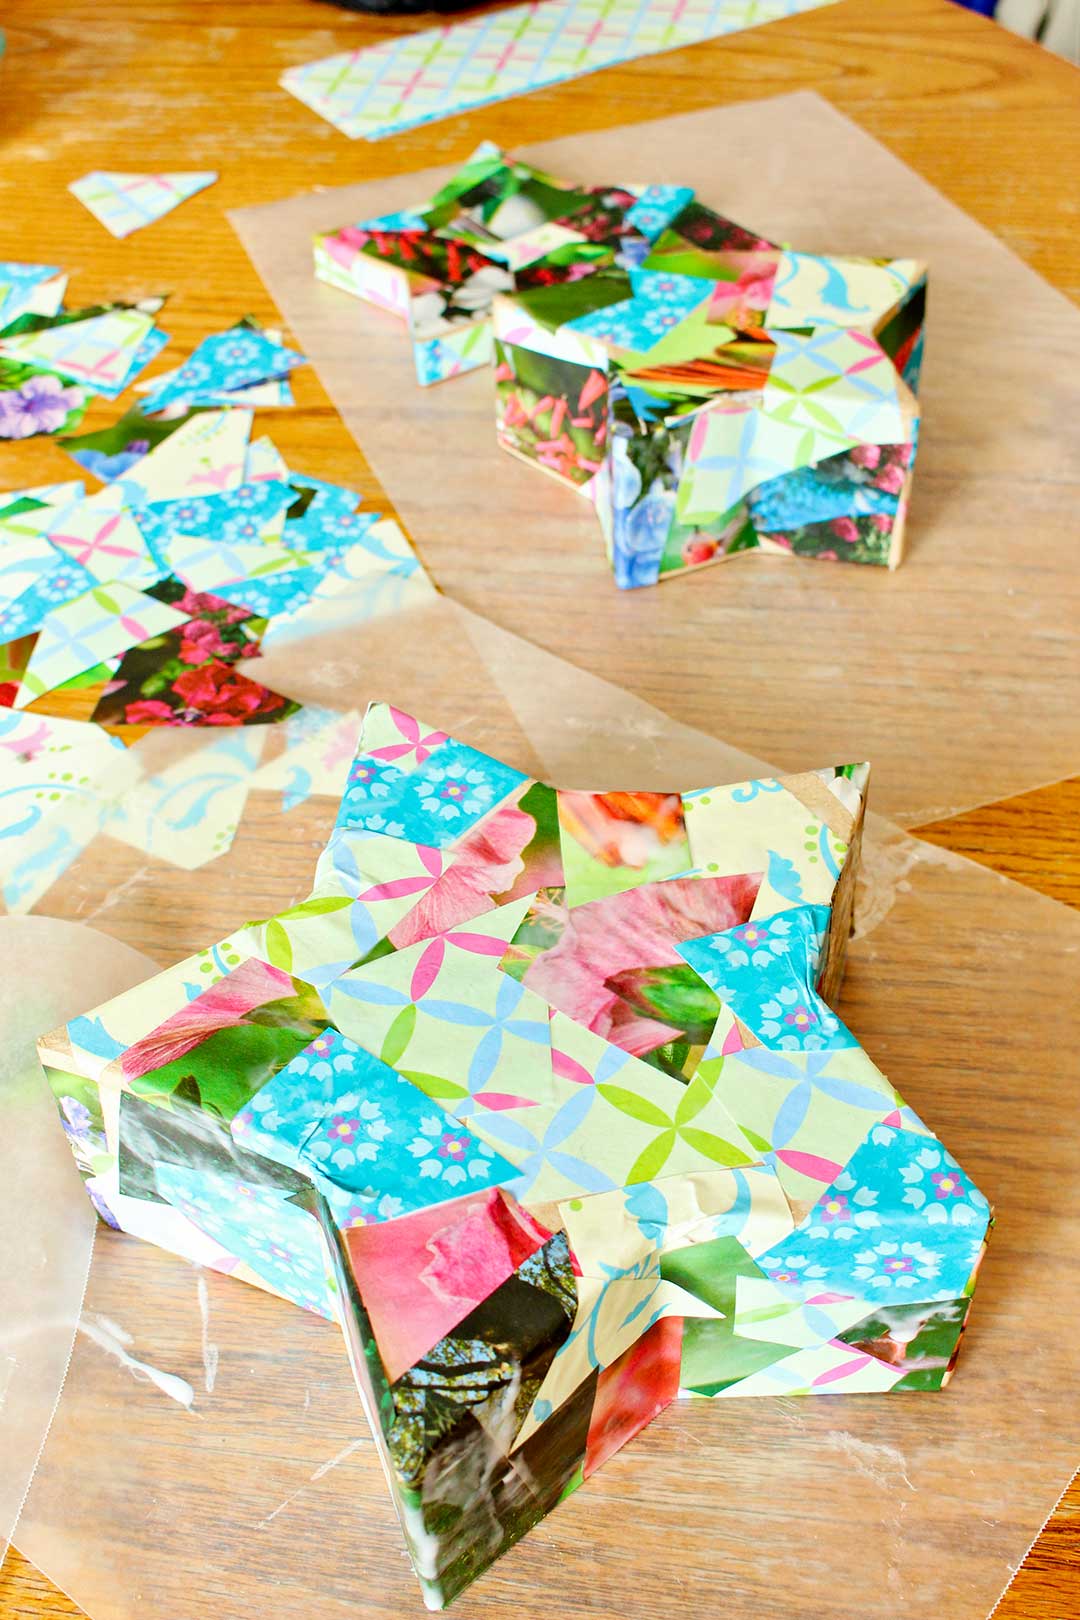 Completed decoupaged boxes resting on wax paper at the kitchen table.